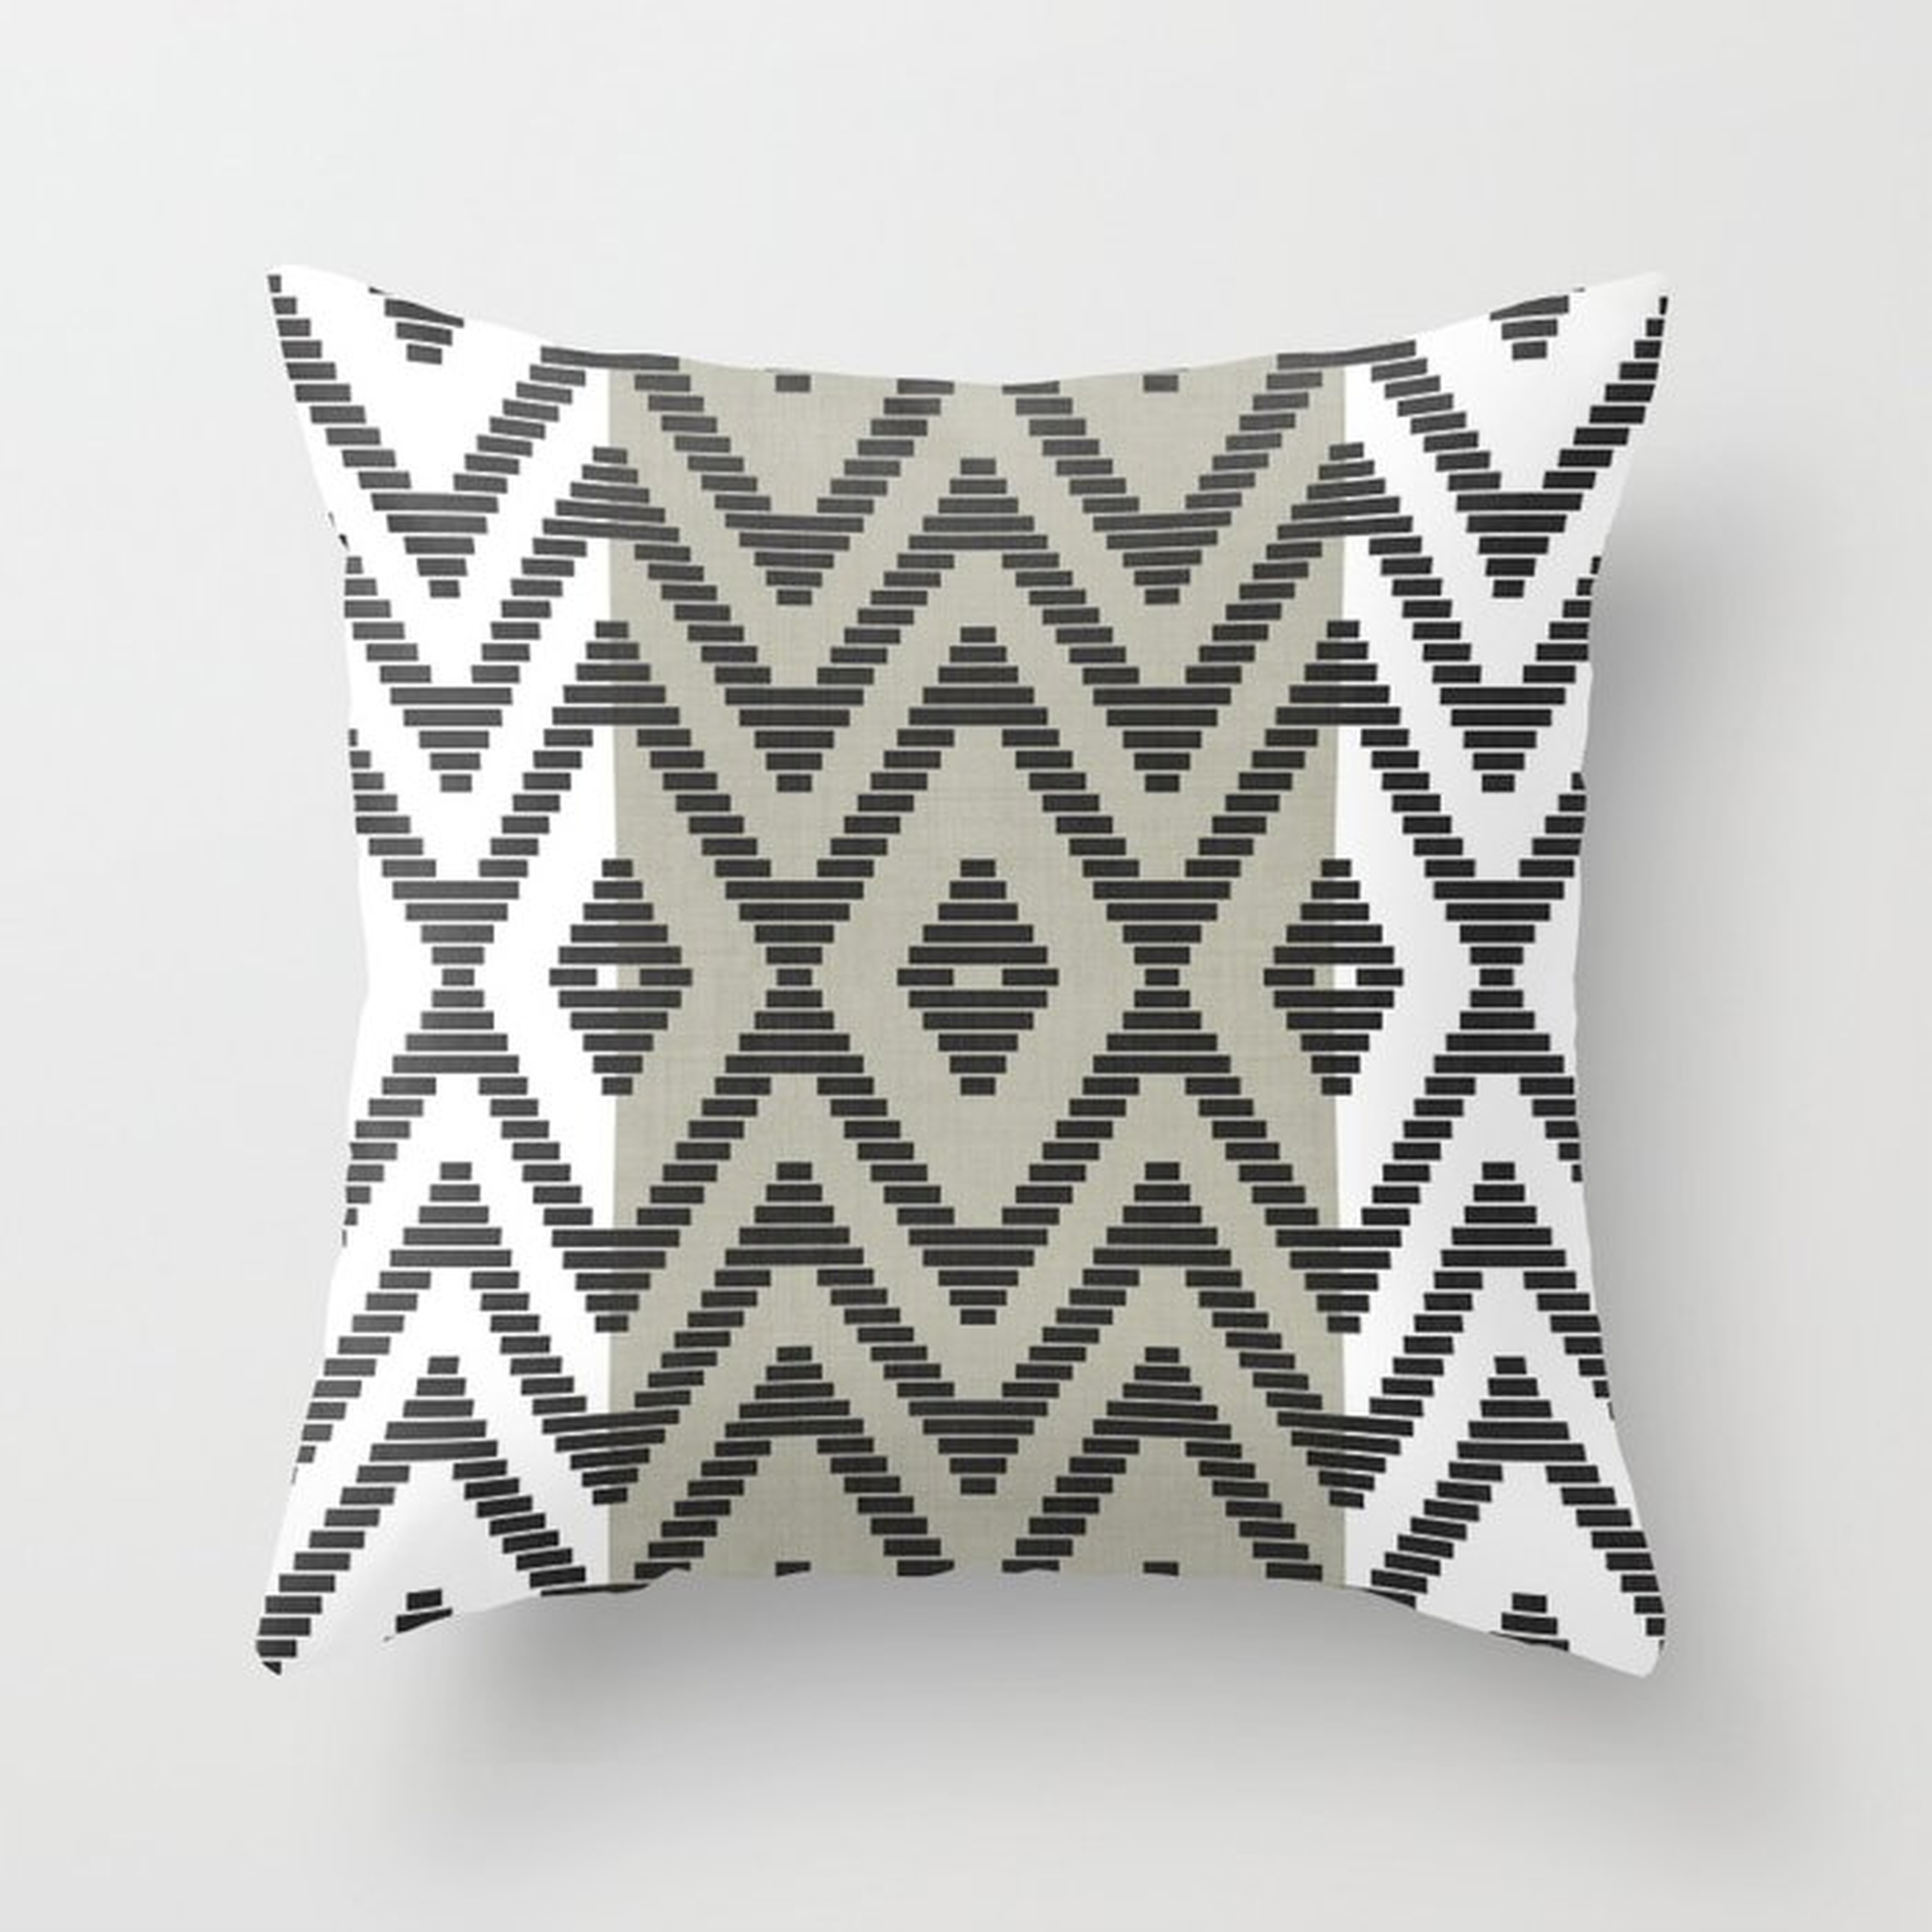 Rattan In Black And Cream Couch Throw Pillow by Becky Bailey - Cover (16" x 16") with pillow insert - Outdoor Pillow - Society6